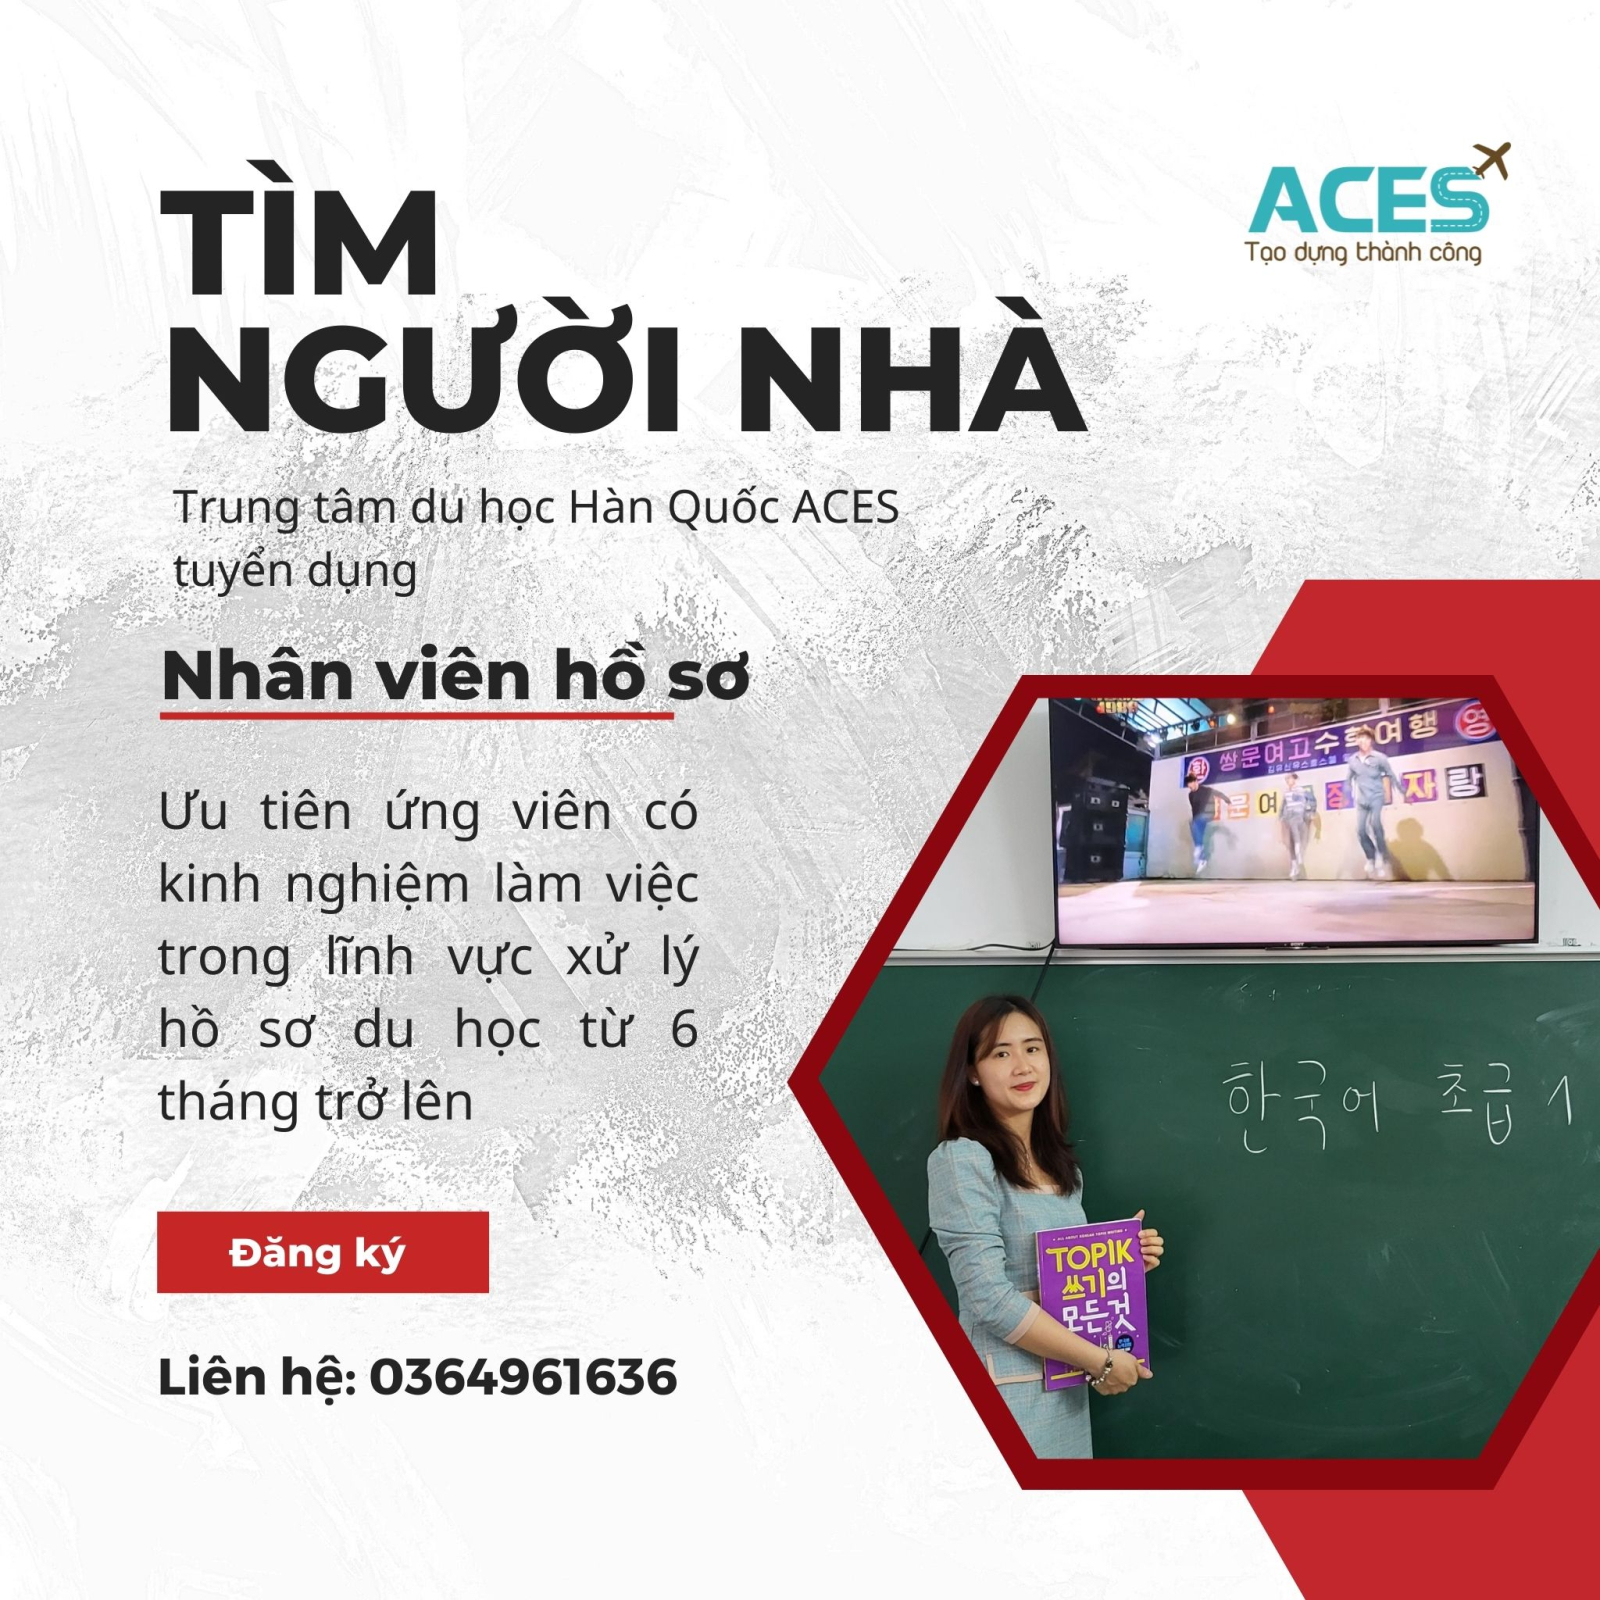 ACES tuyển dụng